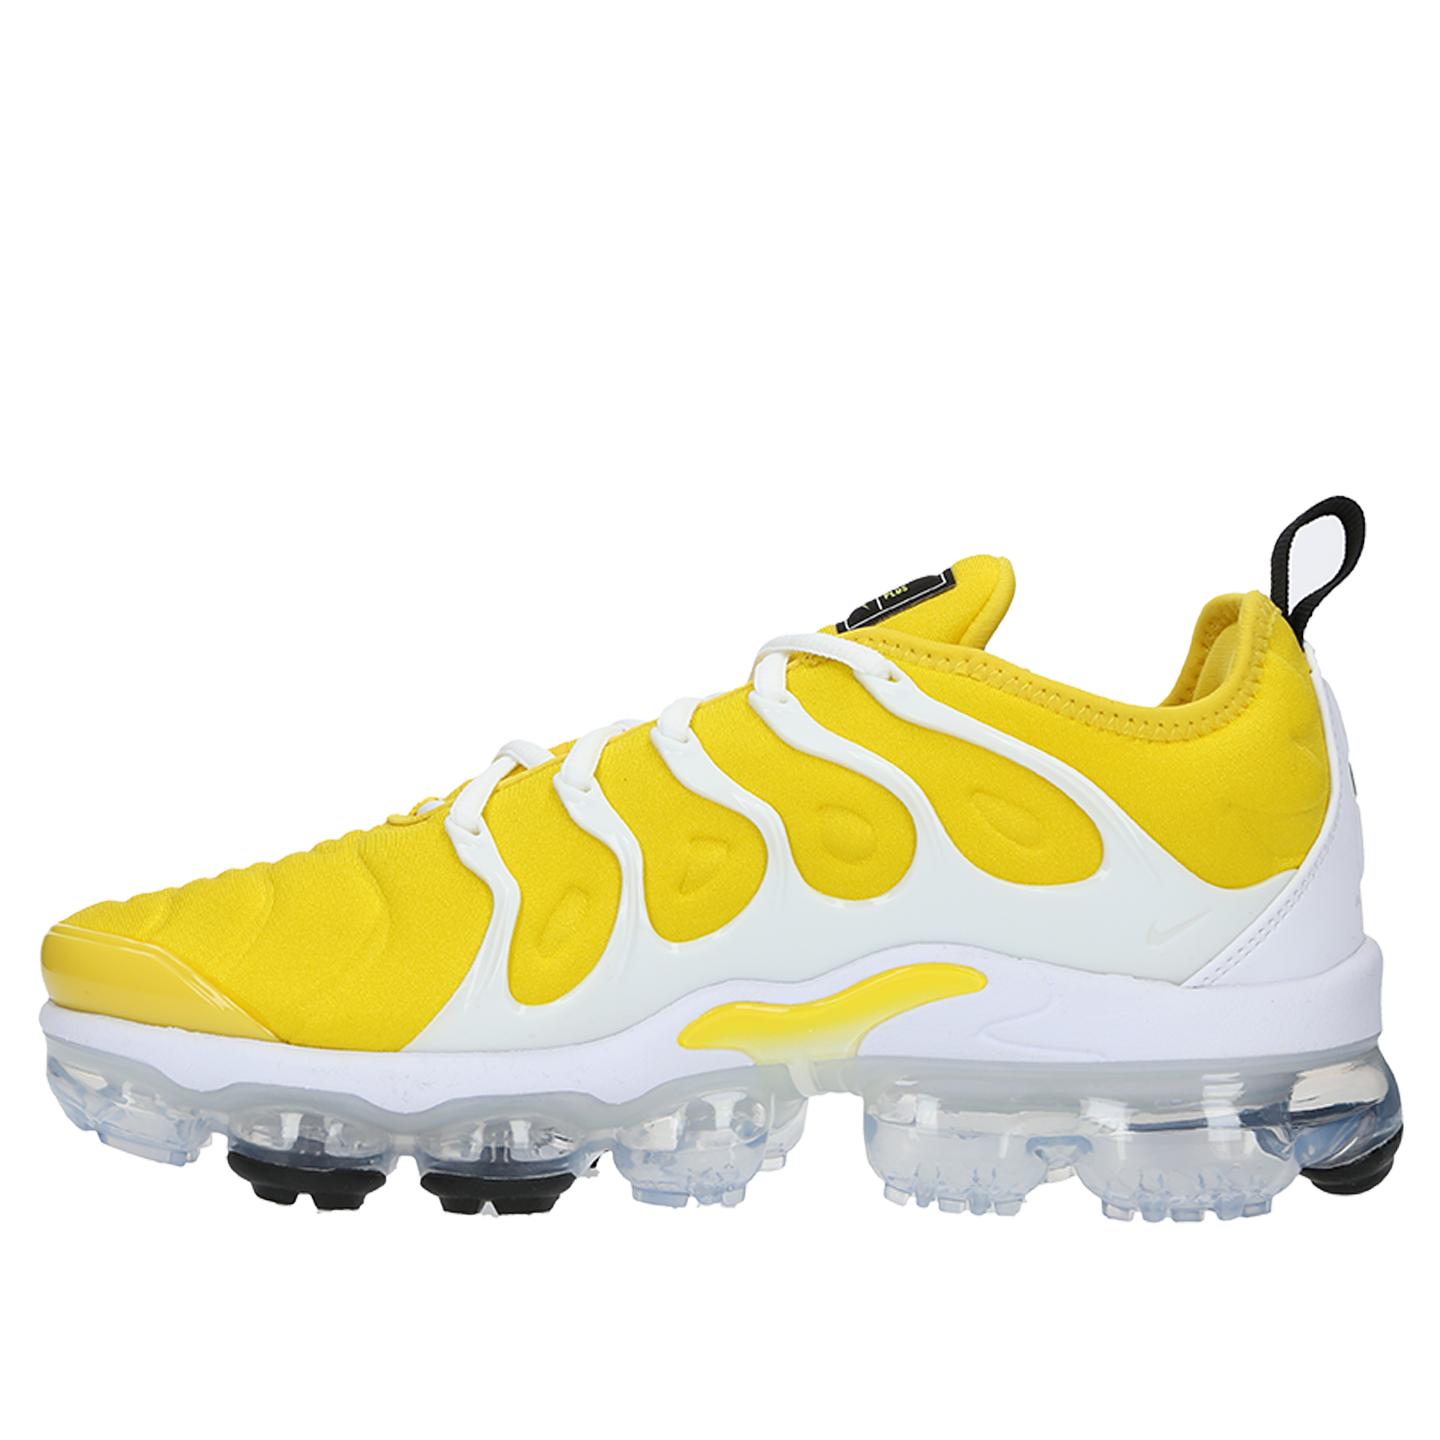 Nike Synthetic Air Vapormax Plus Shoes in Yellow - Lyst